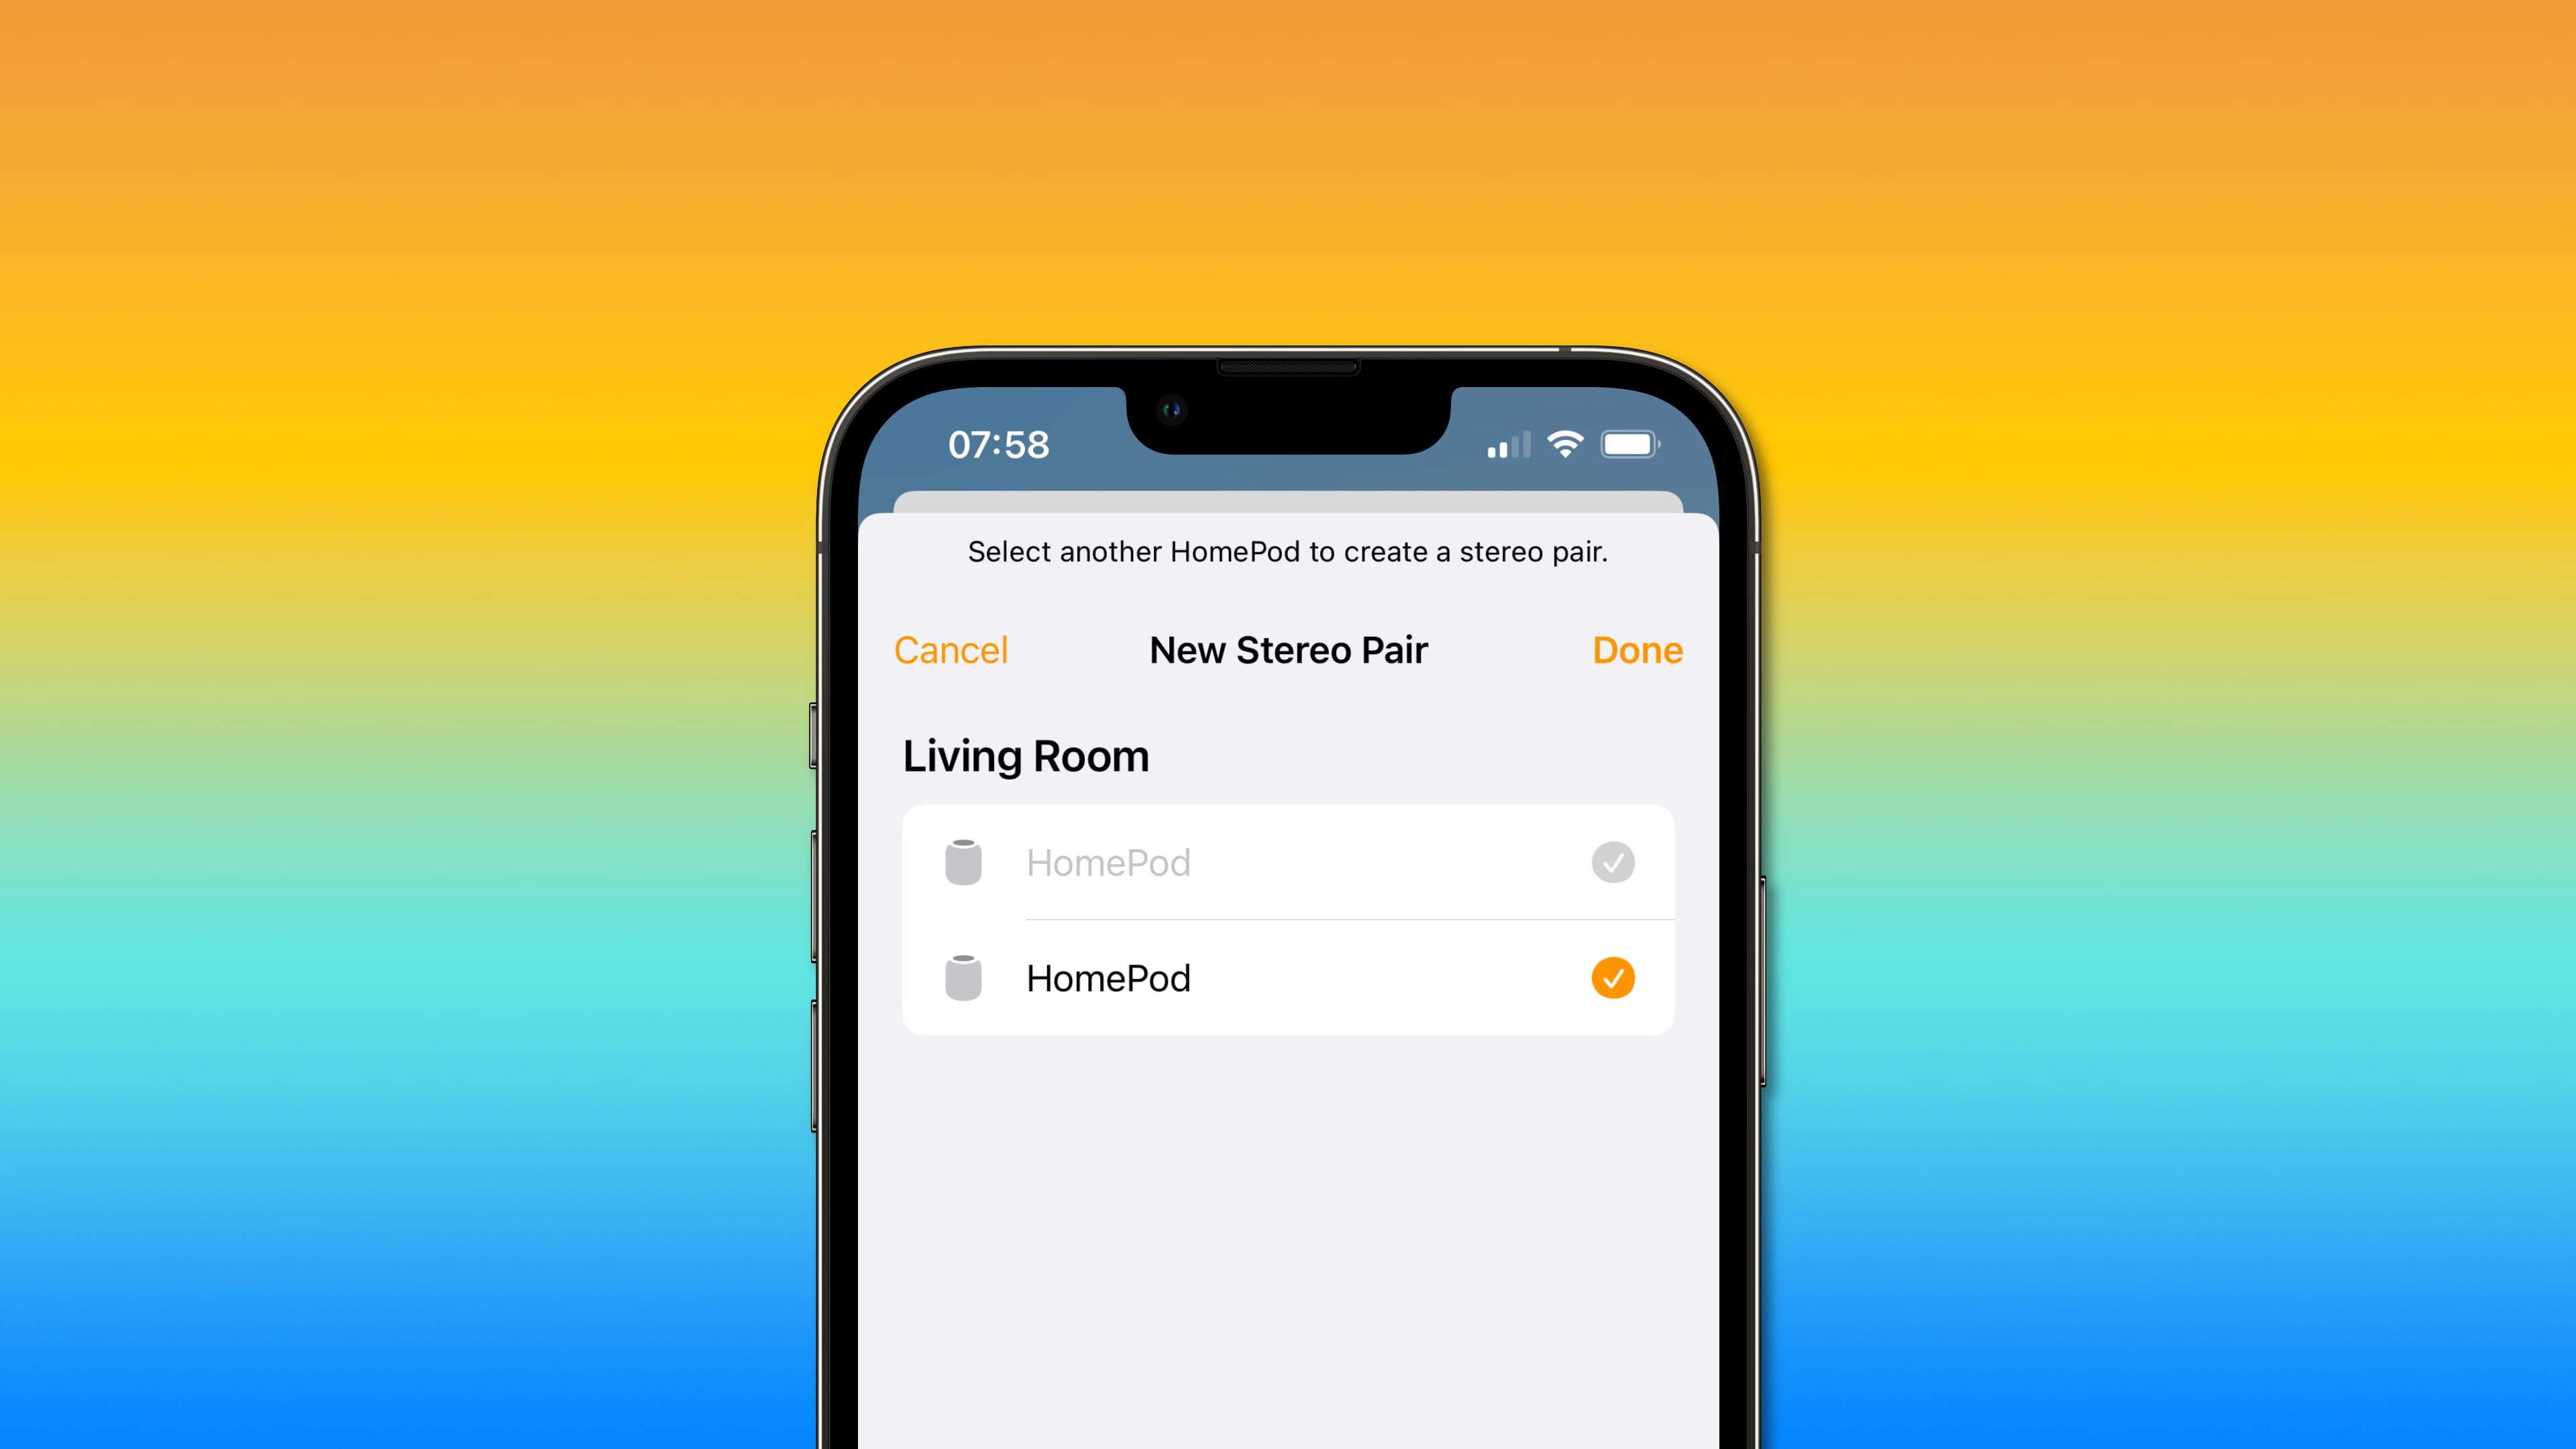 Choosing another HomePod when creating a stereo pair in Apple's Home app